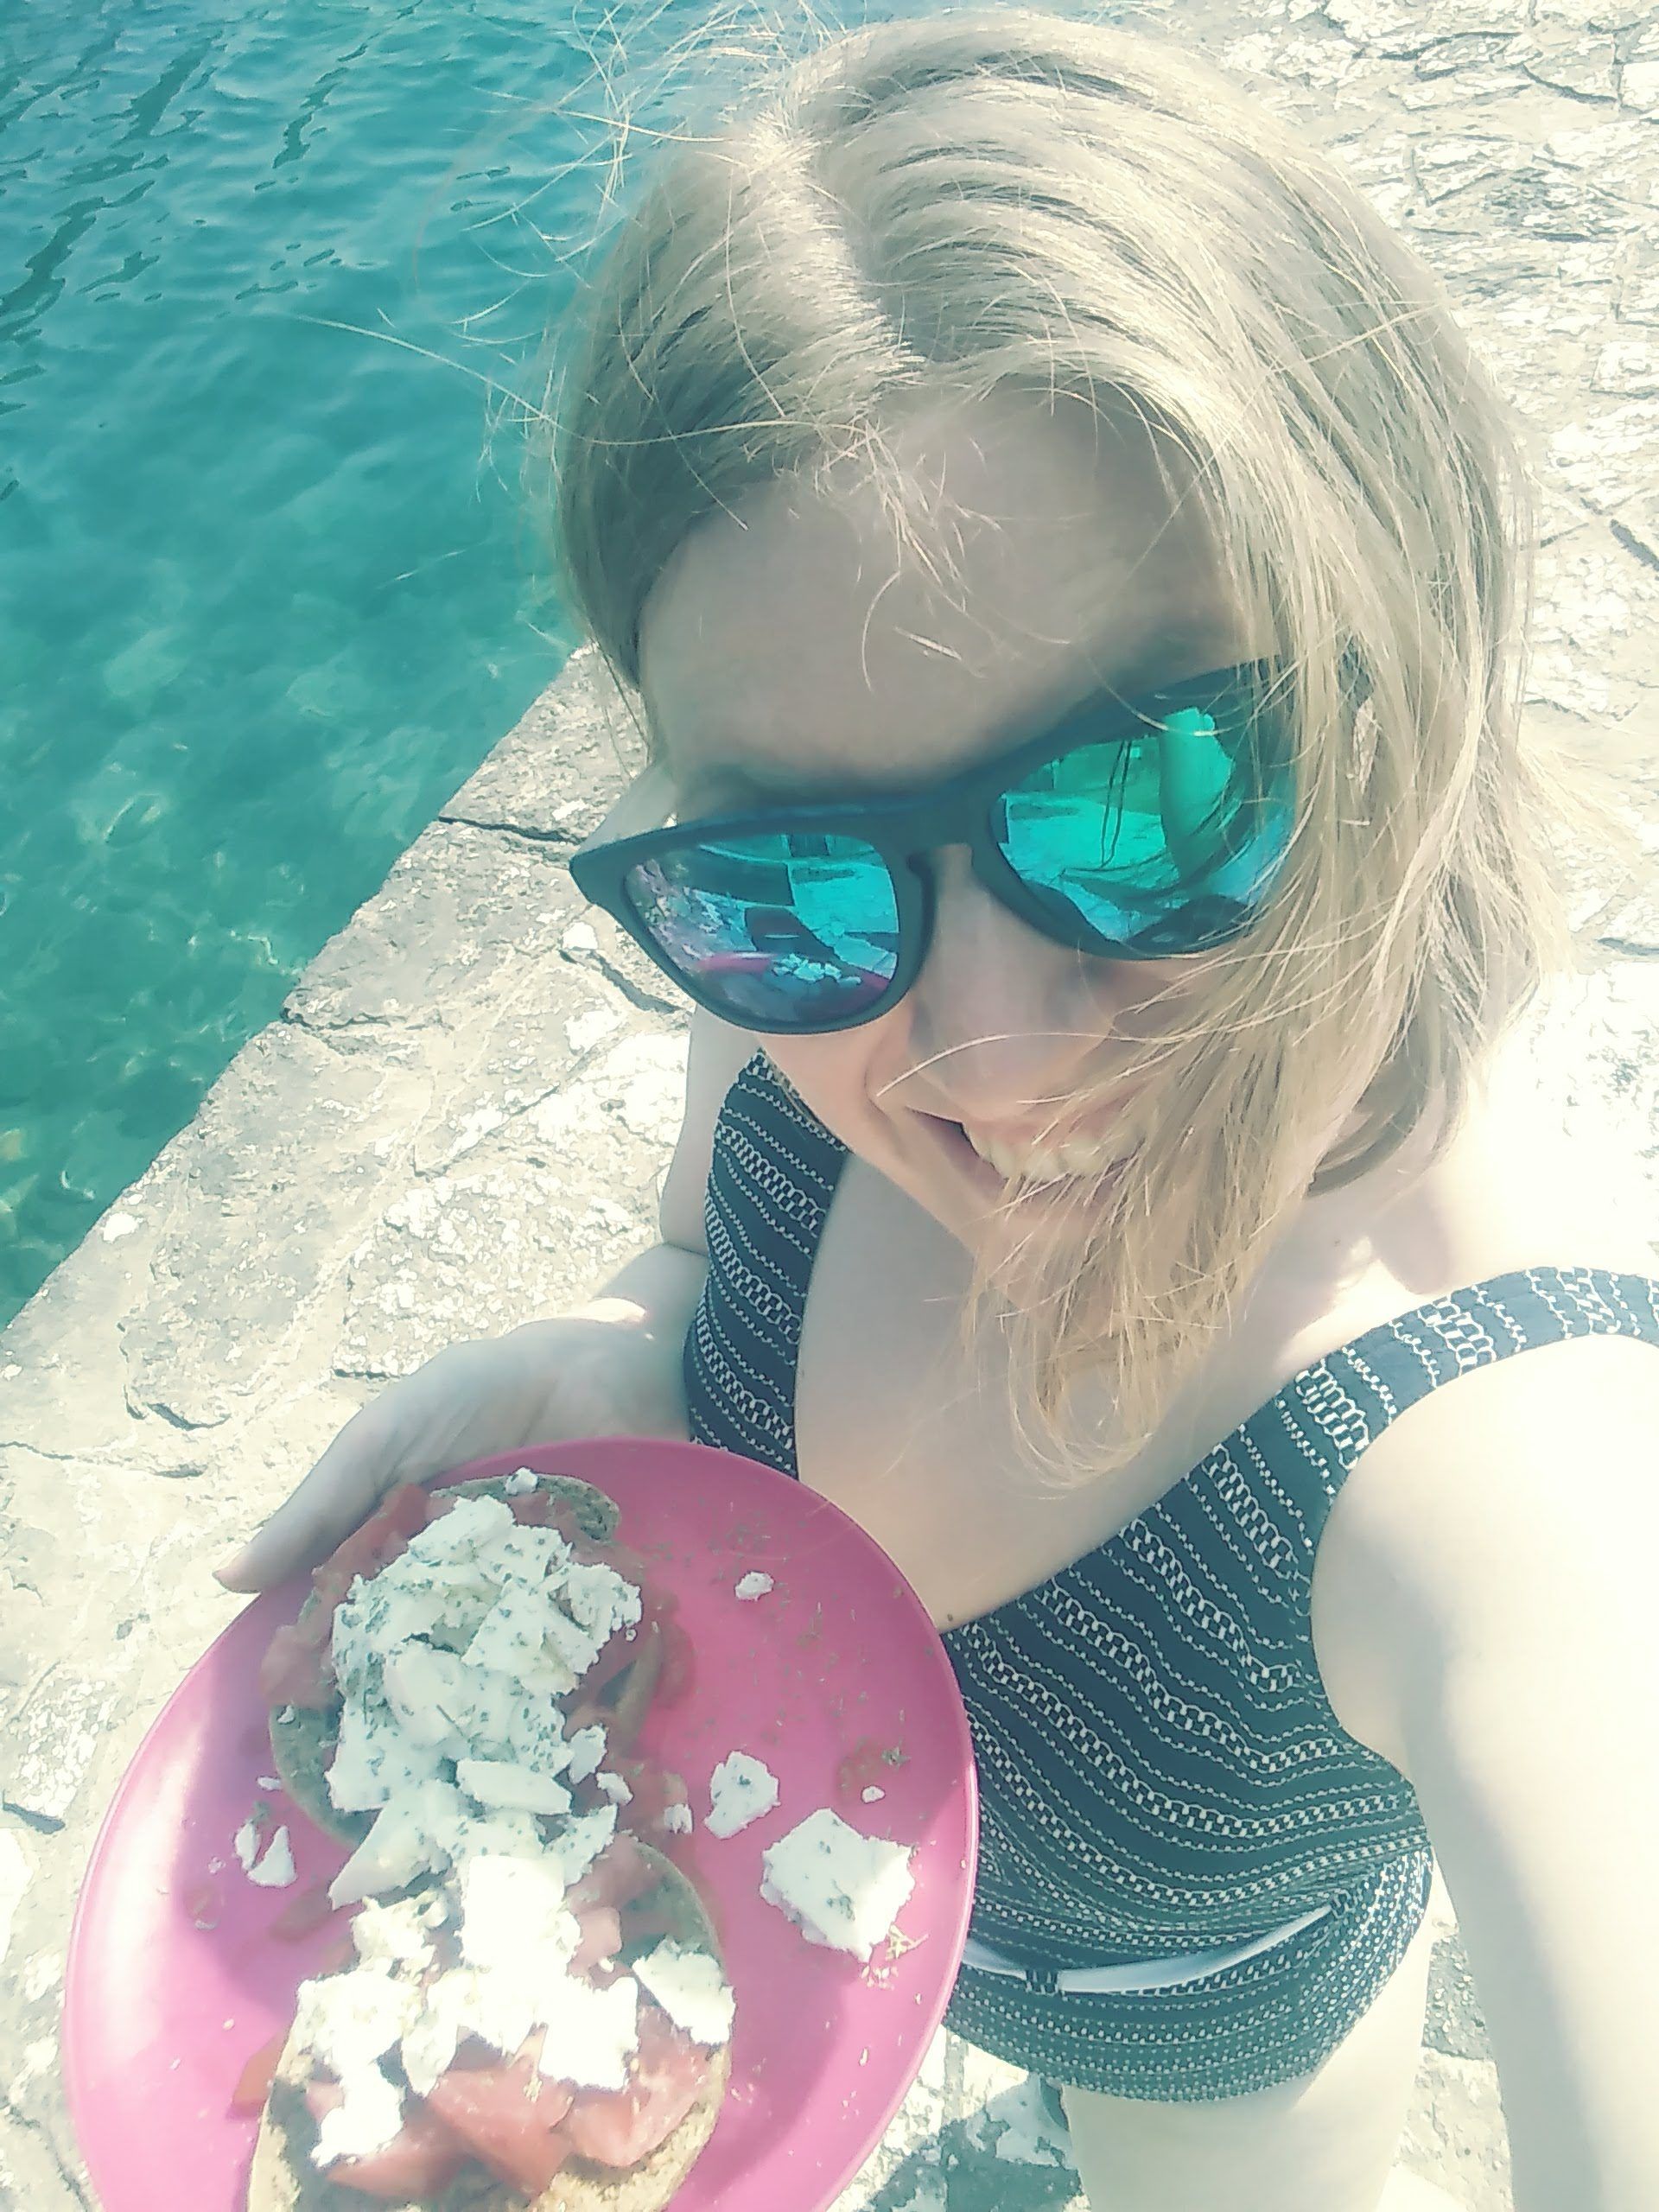 A woman takes a selfie with her lunch in Greece.